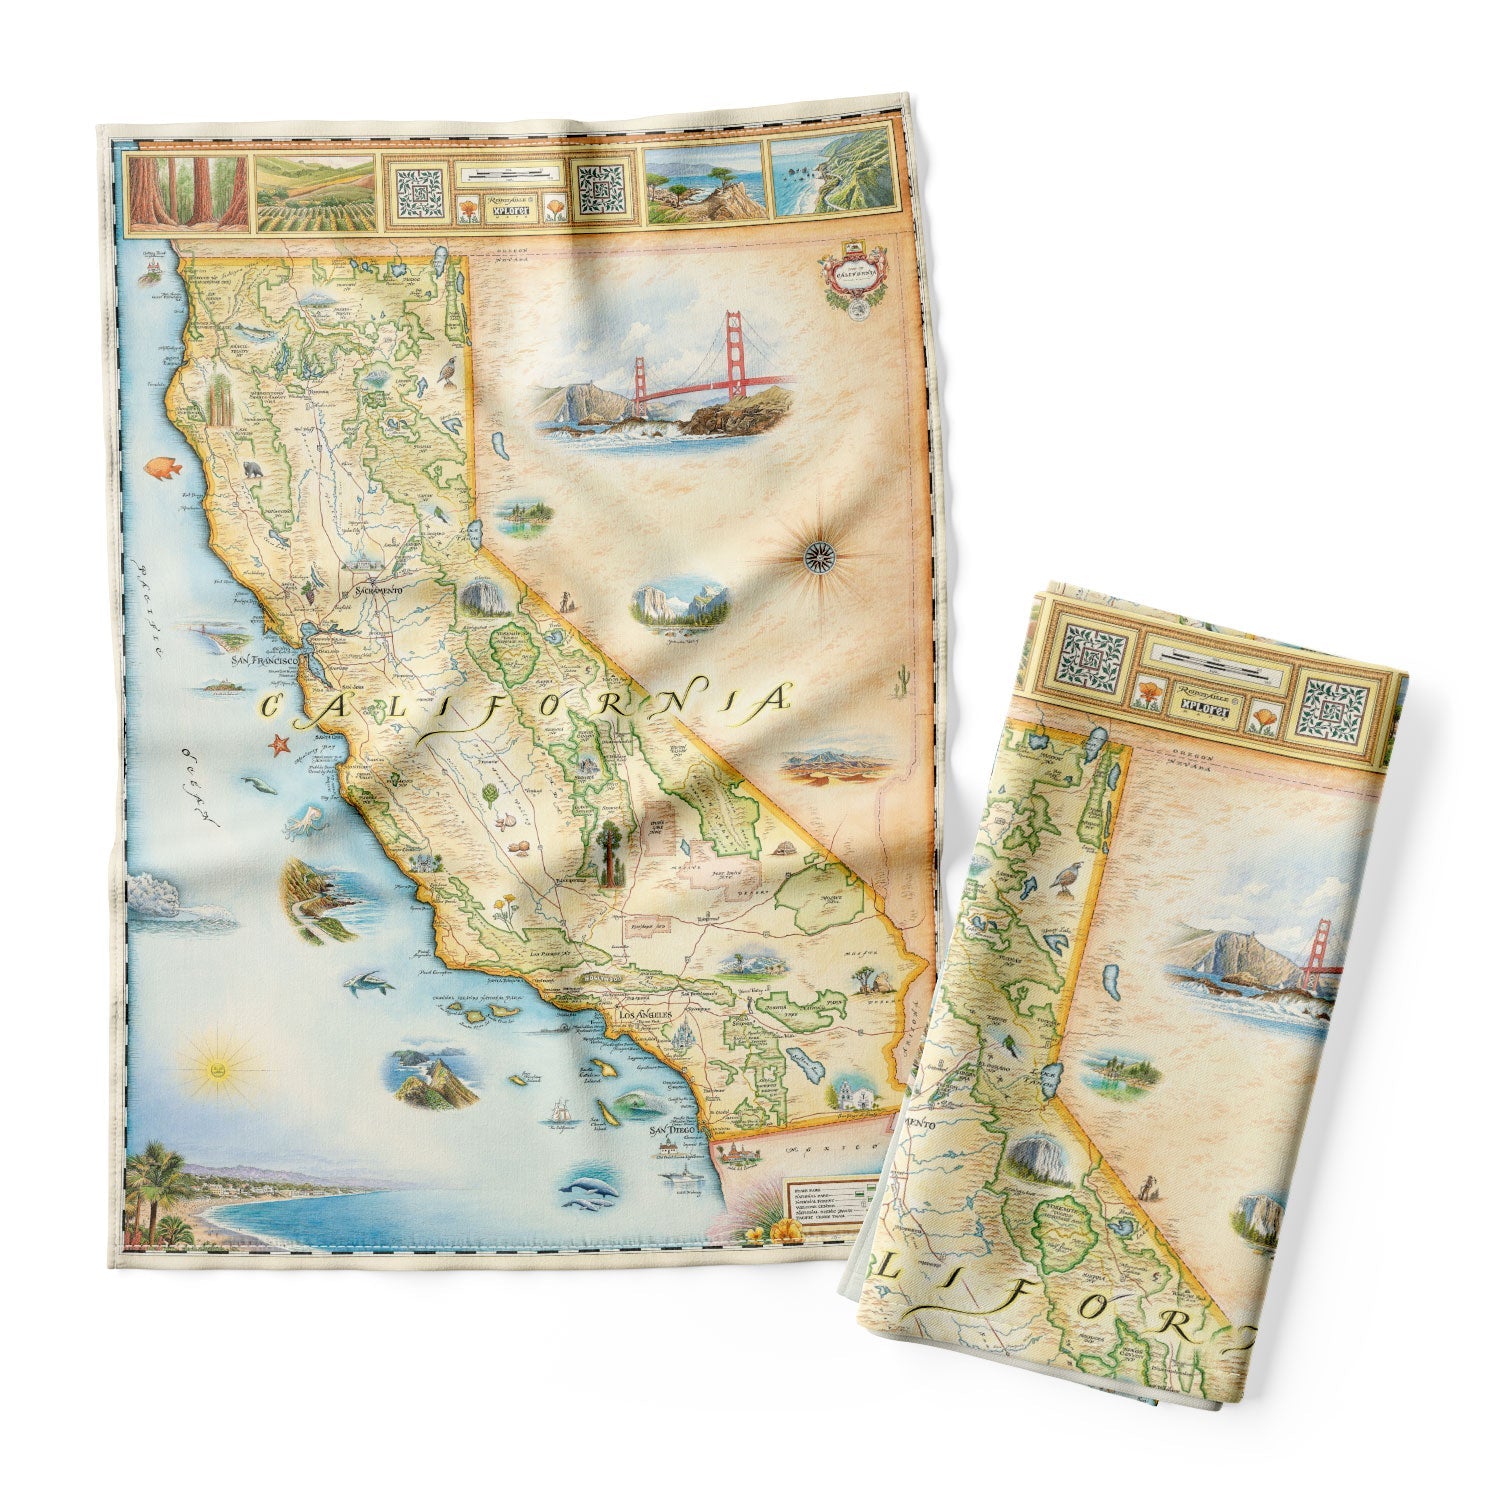 California State Map Kitchen Dishtowel in earth tones. It features birds whales, seals, otters, and butterflies. Cultural history is rich in the area with the fame of Hearst Castle, Ranchers of Montana De Oro, Dunites of Oceano Dunes, and Native people that have lived on this land for thousands of years from San Francisco to Los Angeles. Some cities you will find are Arroyo Grande, San Luis Obispo, Morro Bay, and Paso Robles.